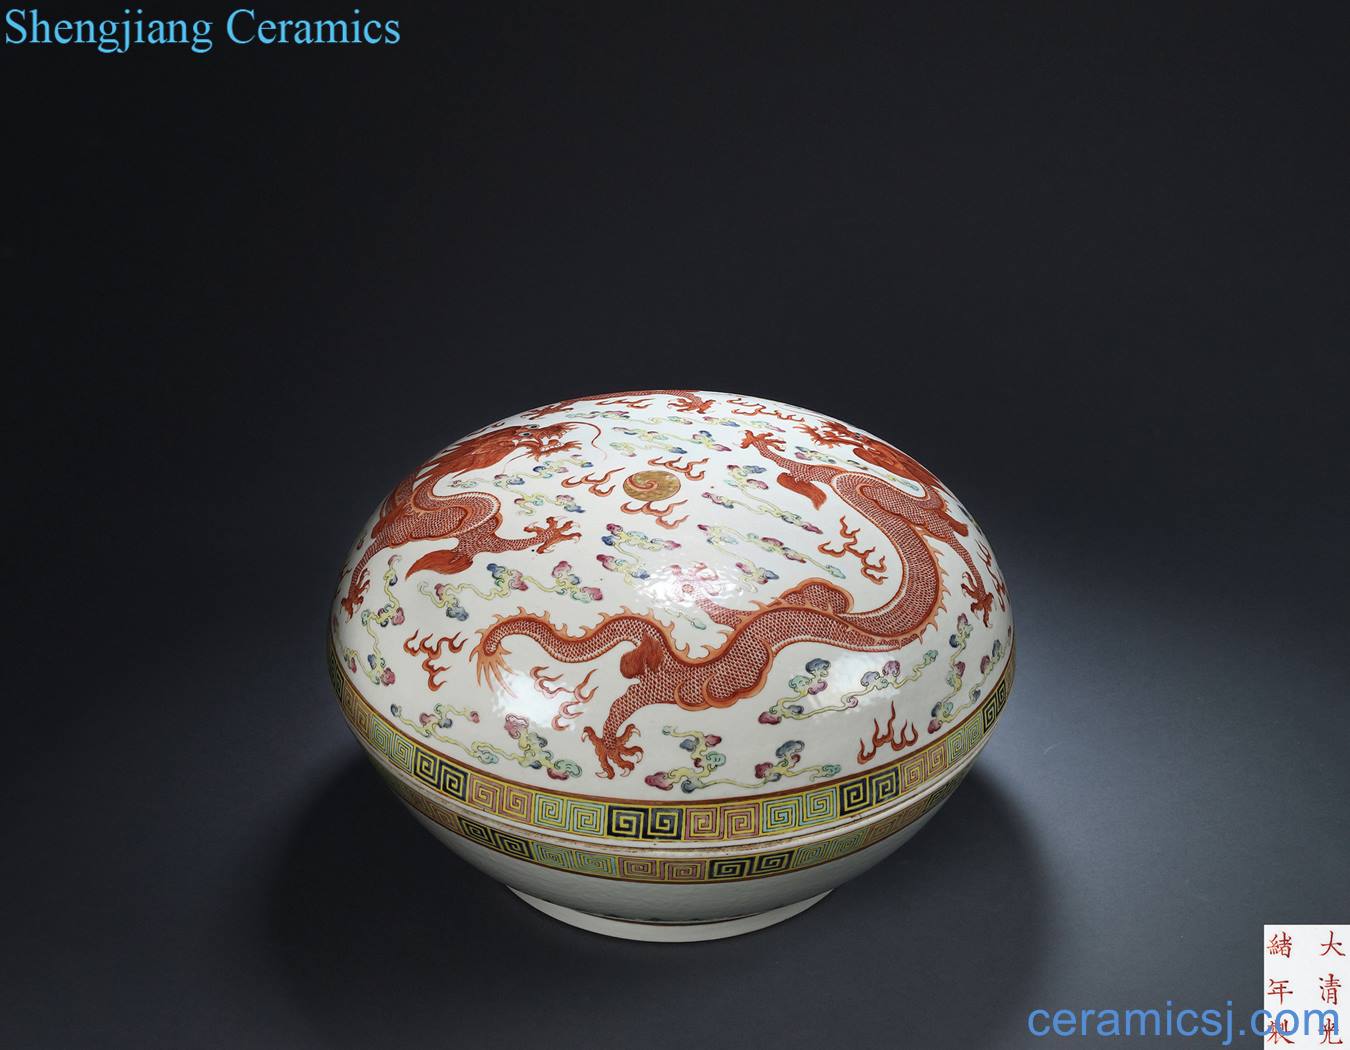 Alum reign of qing emperor guangxu red enamel paint box "hold ssangyong bead"